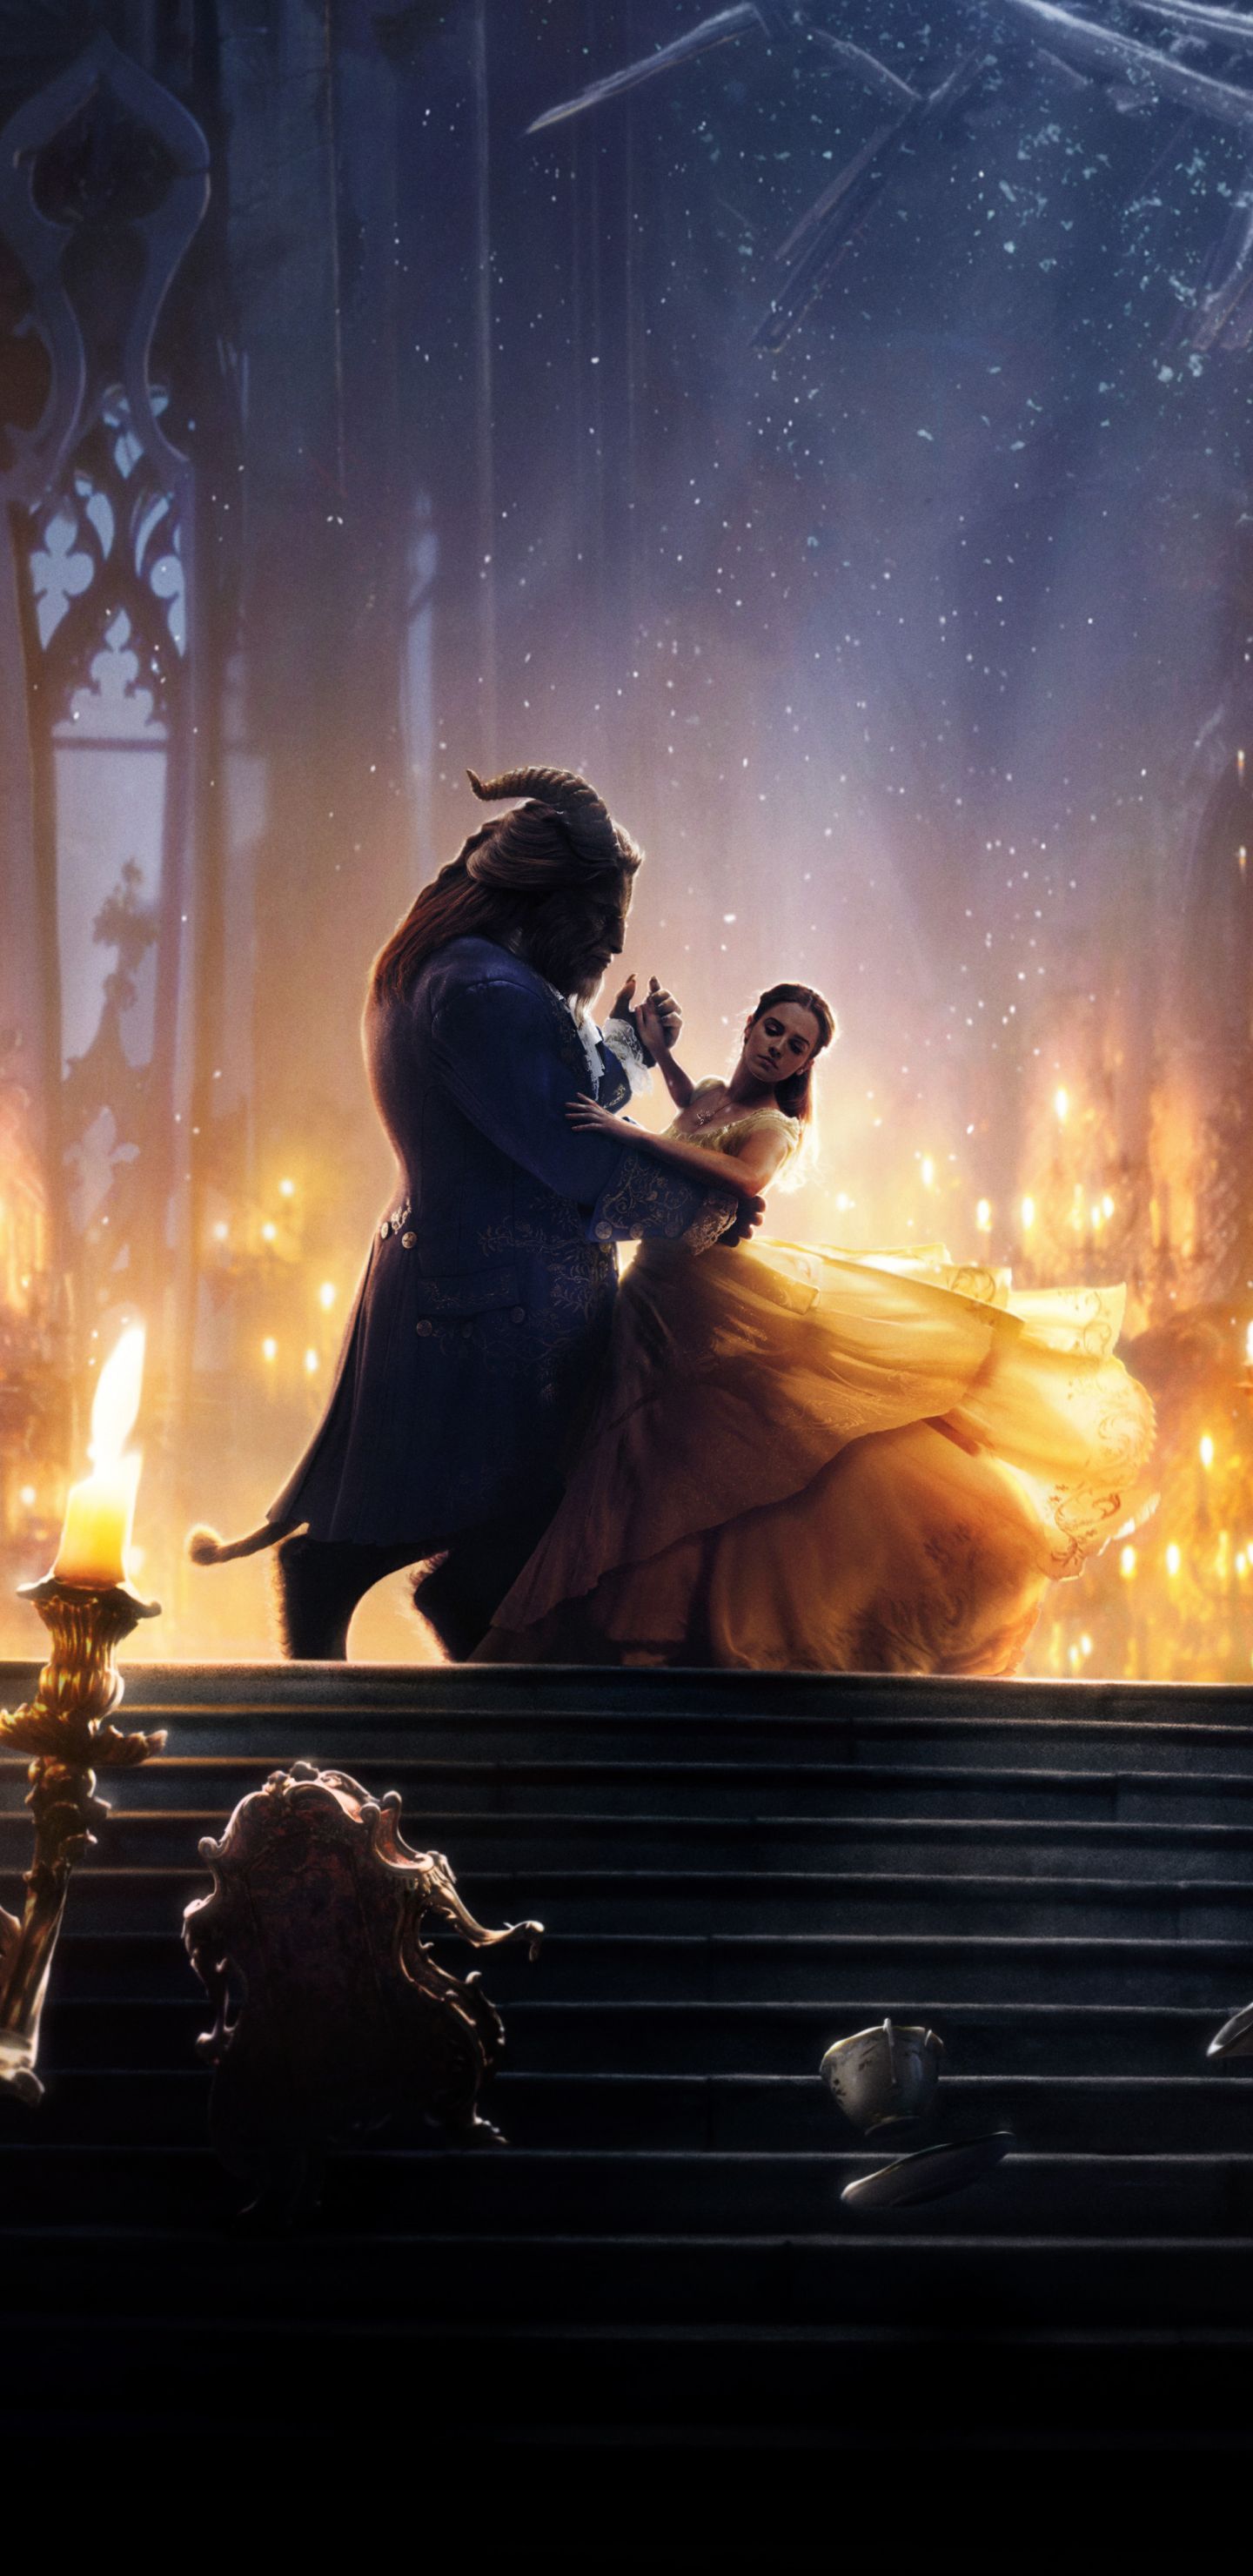 Movie Beauty And The Beast (2017) (1440x2960) Wallpaper